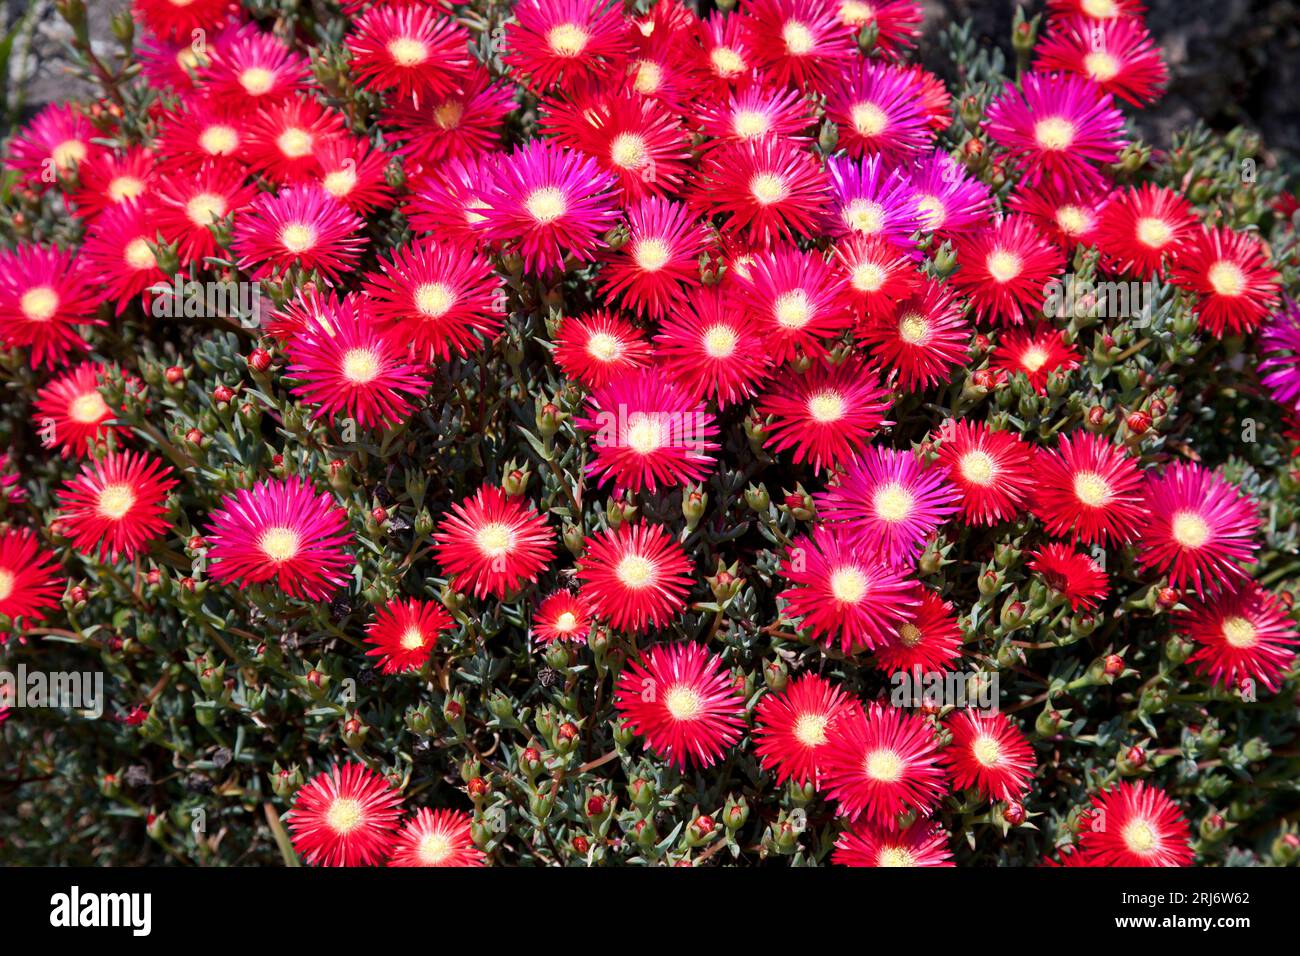 Image of a collection of Drosanthemum flower heads Stock Photo